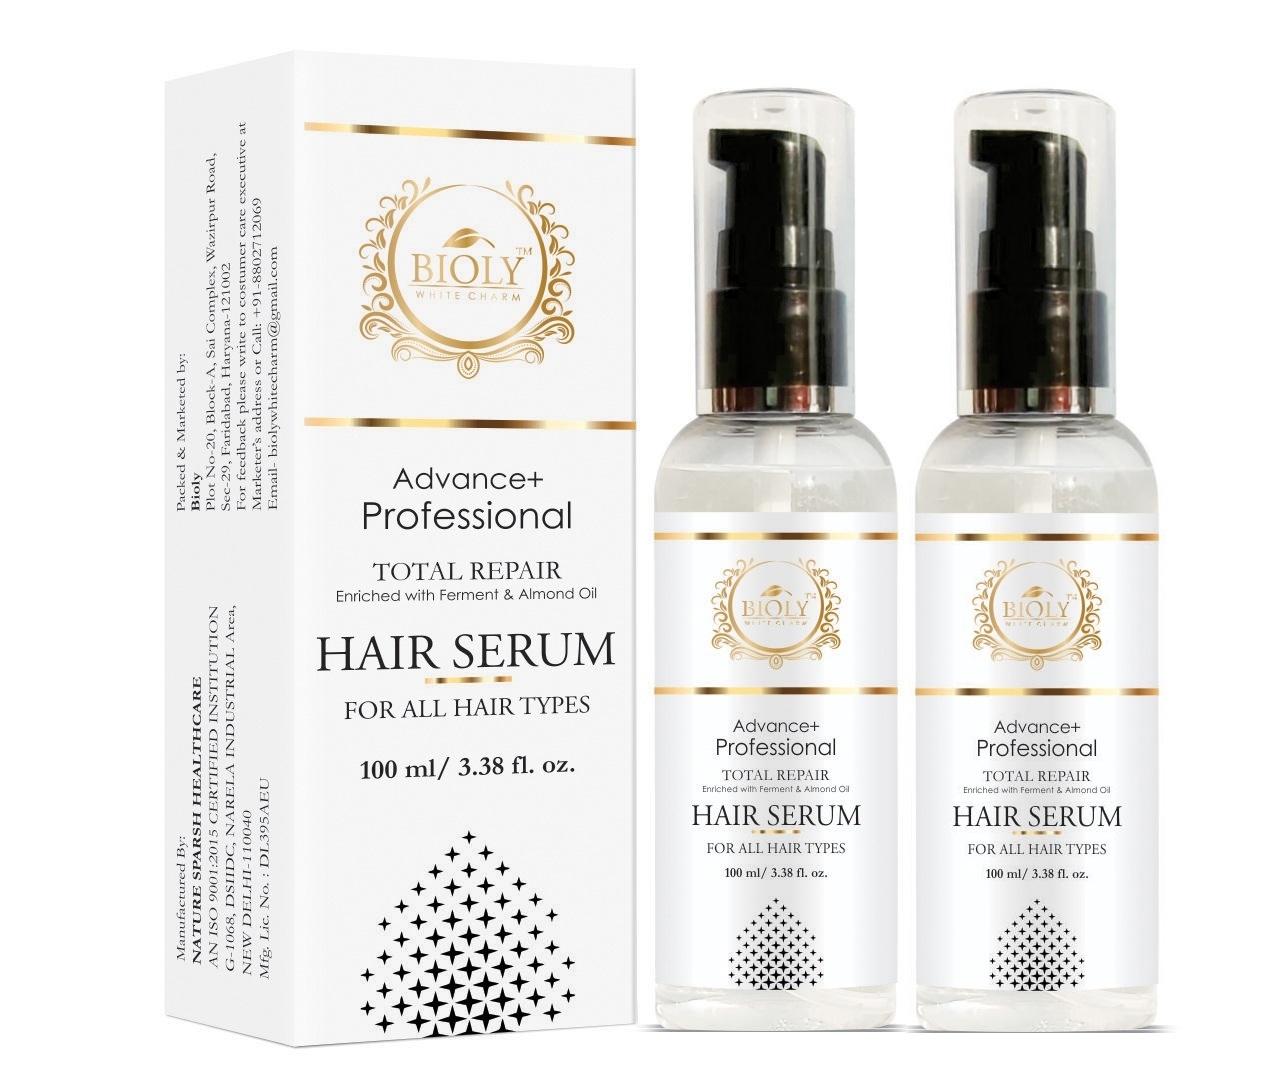 Bioly Hair Serum Advance + Professional Total Hair Repair Serum for Hair  Shine, Silky, Glossy, Softer, Smooth & Tangle Free, Frizz Free Hair,  Enriched with Ferment & Almond Oil (100 ML Each,